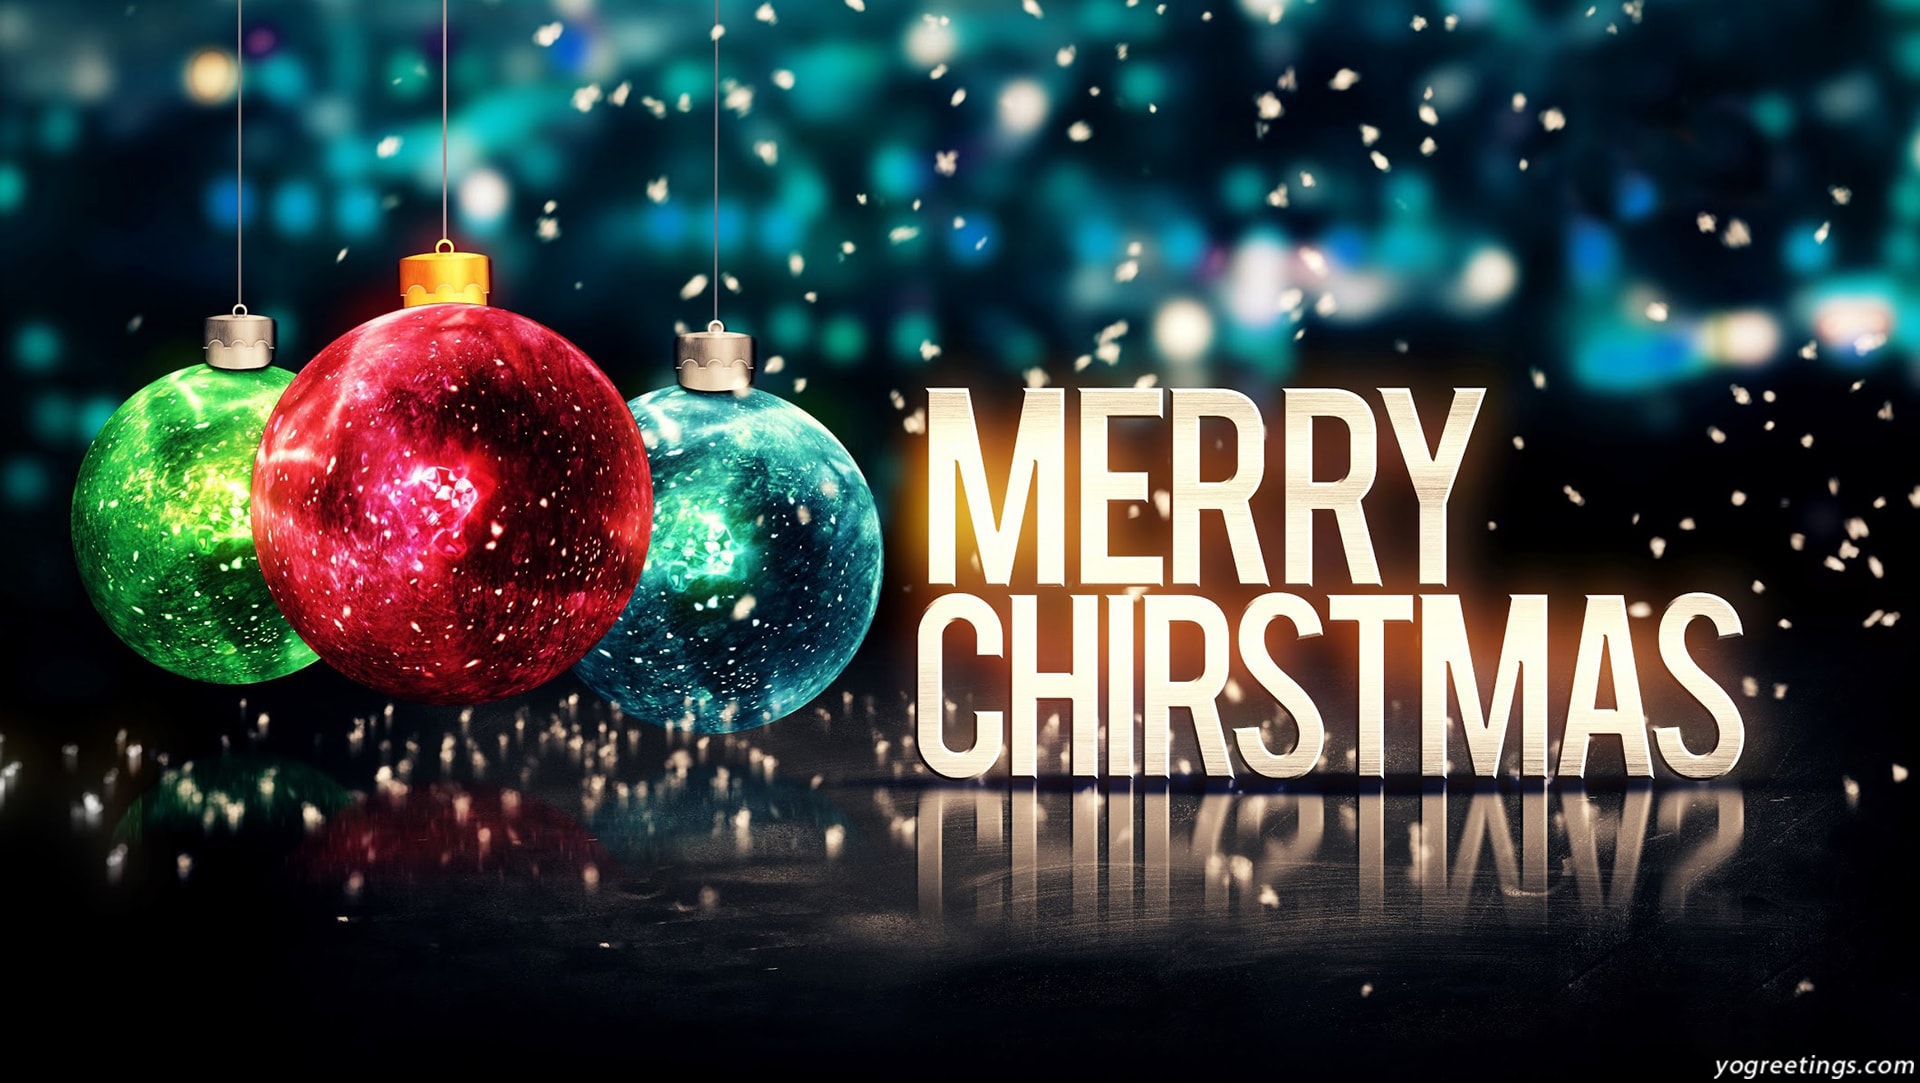 Merry Christmas Wallpaper Full HD Free Download - Images 6